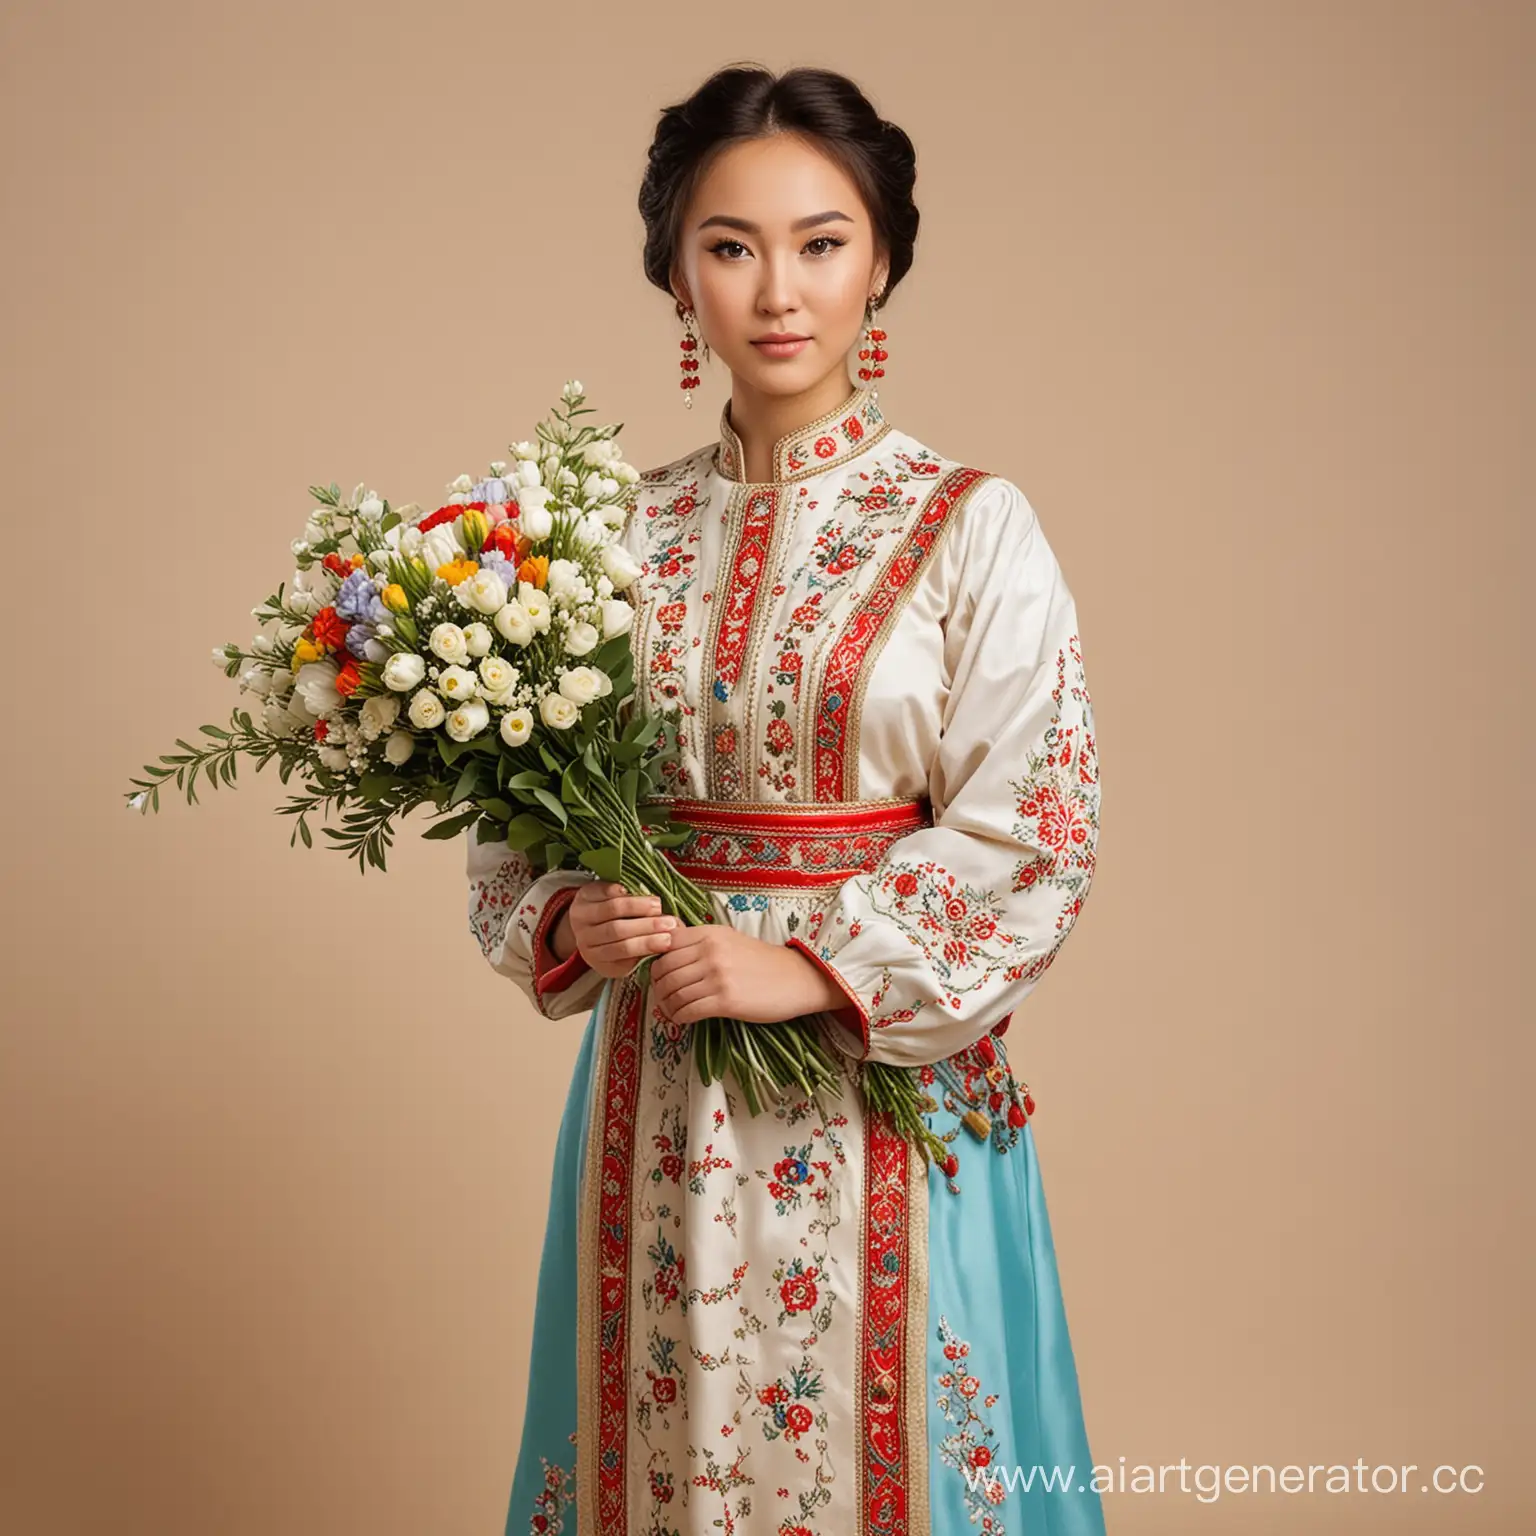 Kazakh-Girl-in-Ornate-National-Dress-Holding-Bouquet-of-Flowers-on-Beige-Background